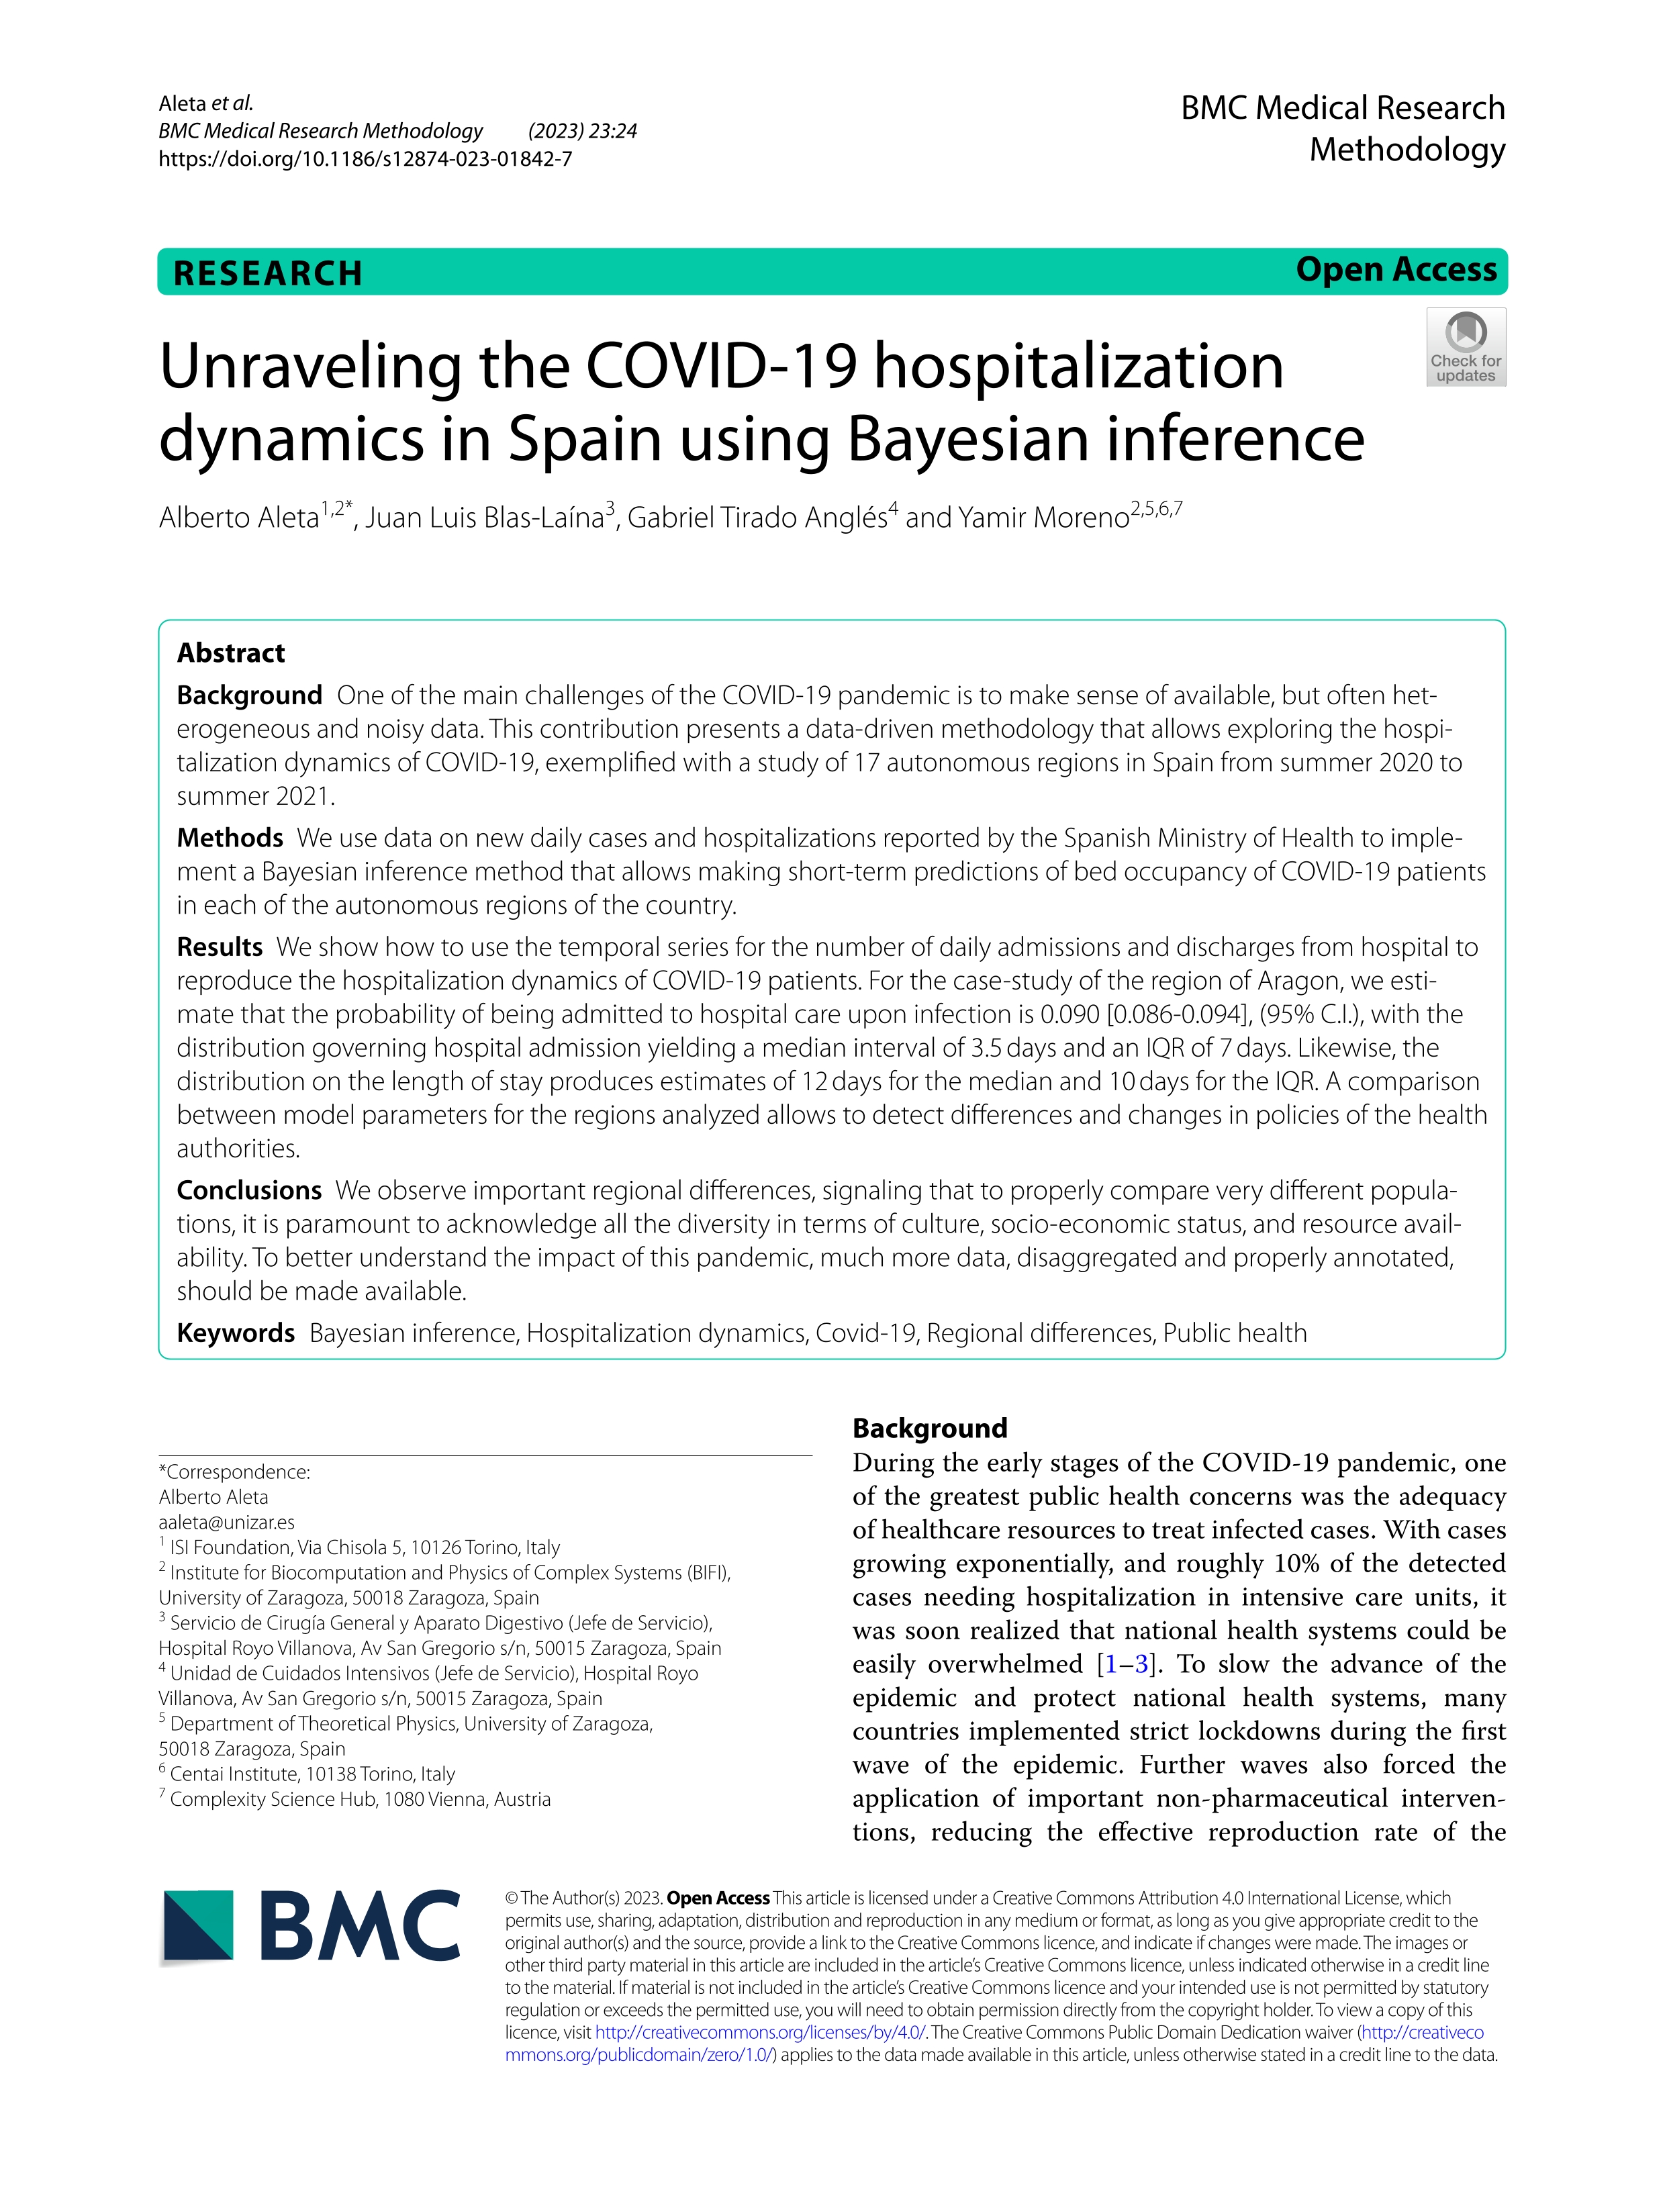 Unraveling the COVID-19 hospitalization dynamics in Spain using Bayesian inference